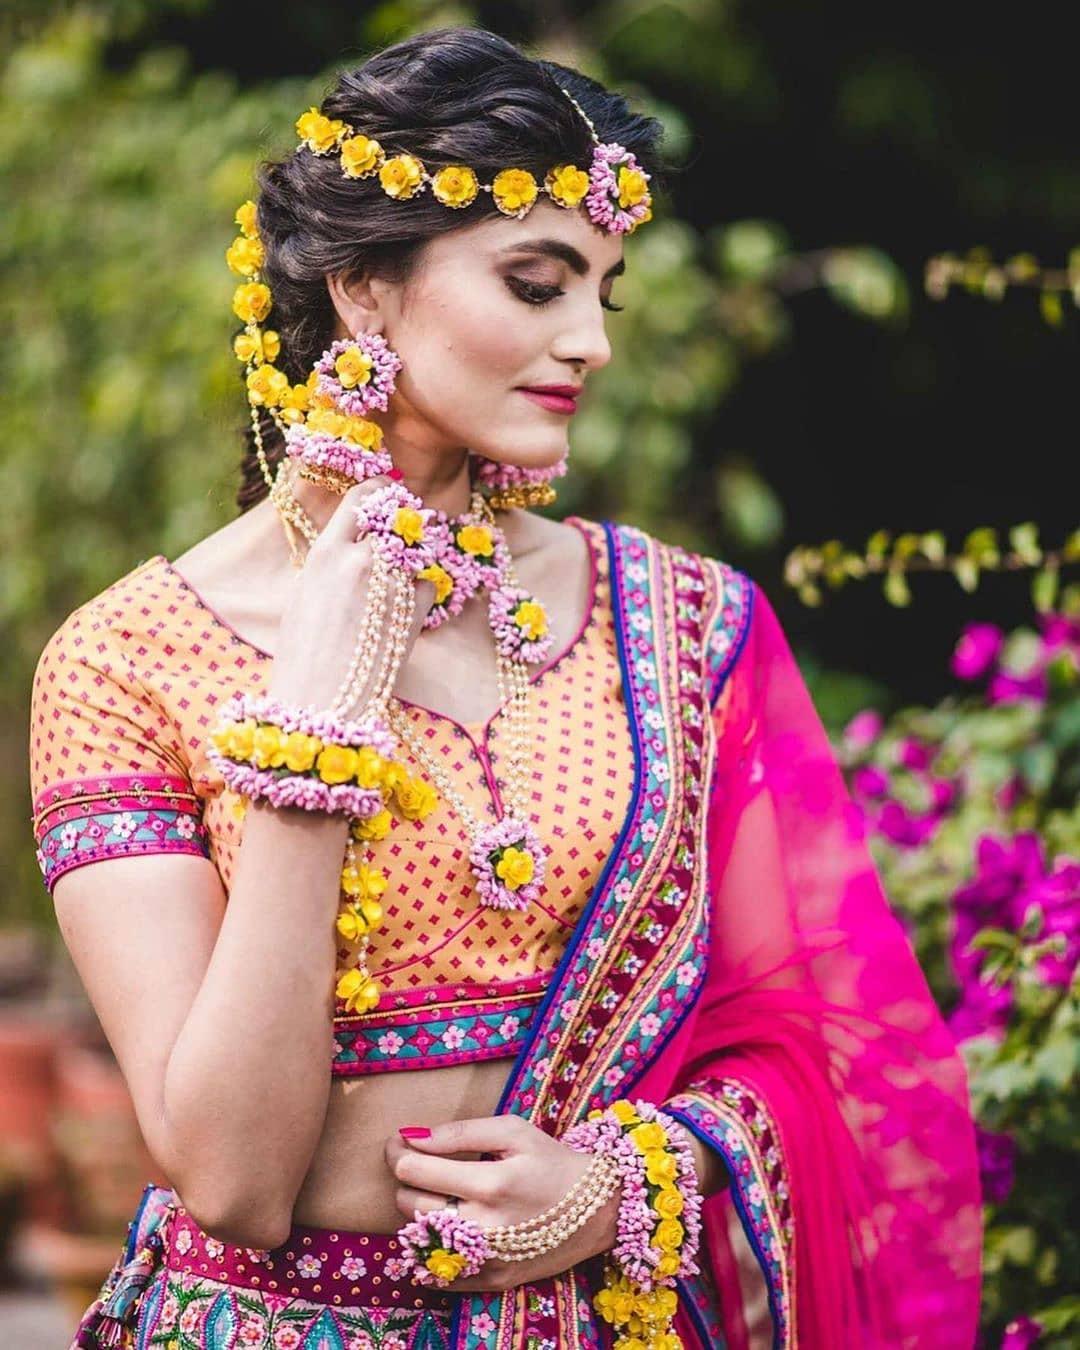 8 Gorgeous Indian Bridal Hair Accessories That Will Spruce Up Your Look!